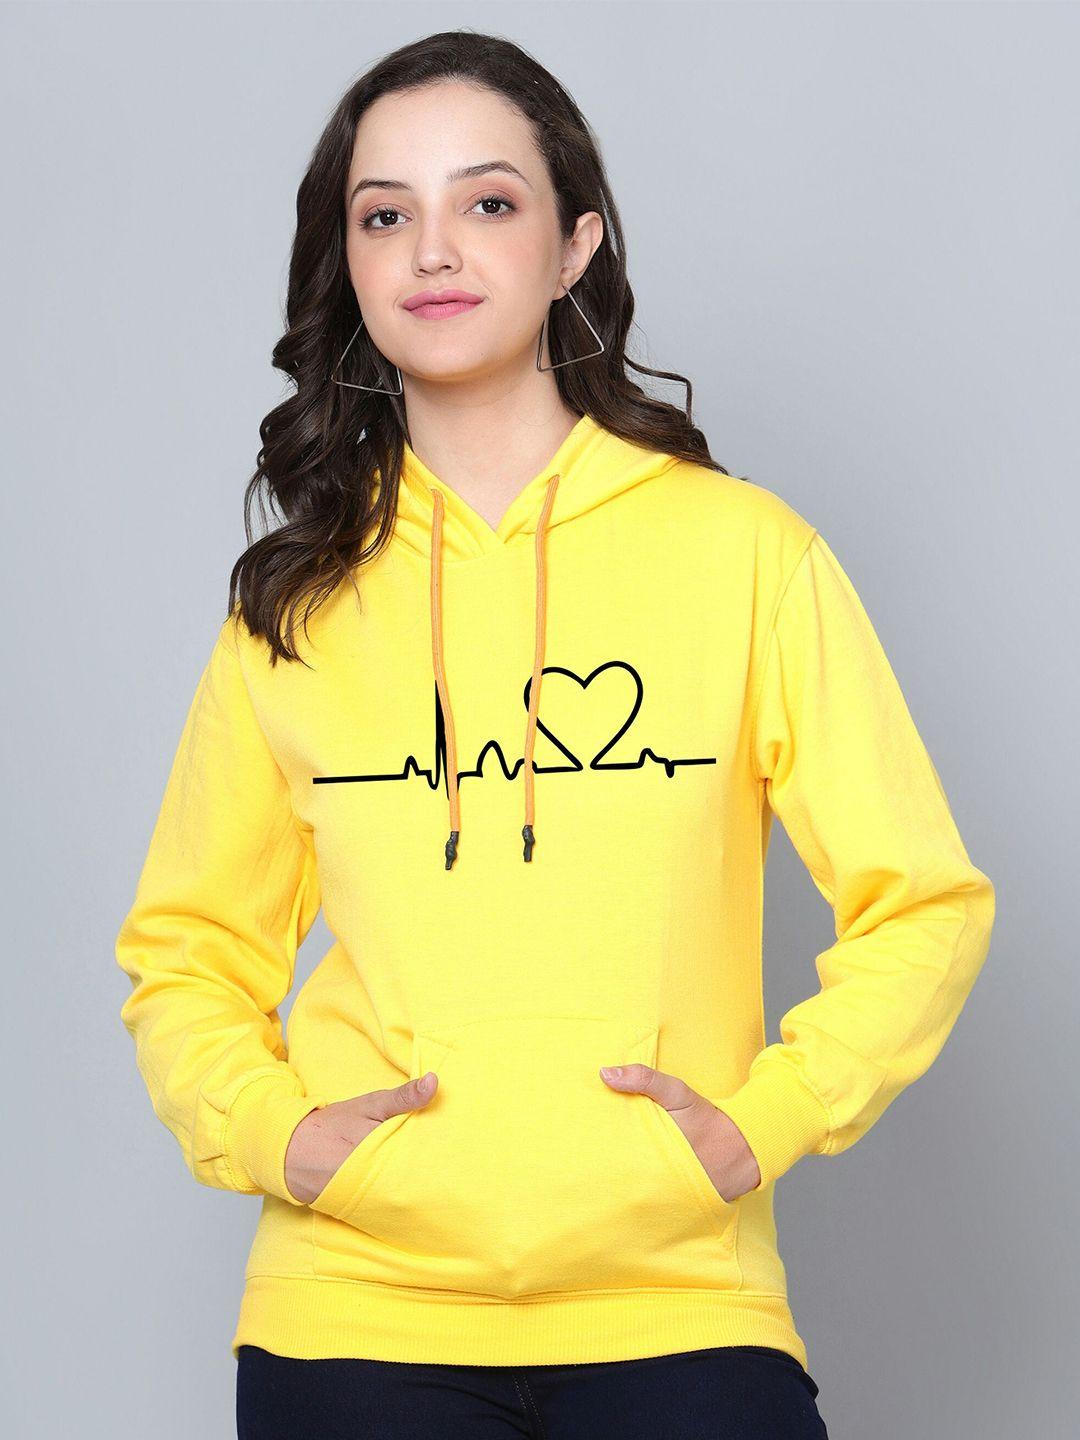 fashion and youth graphic printed hooded sweatshirt